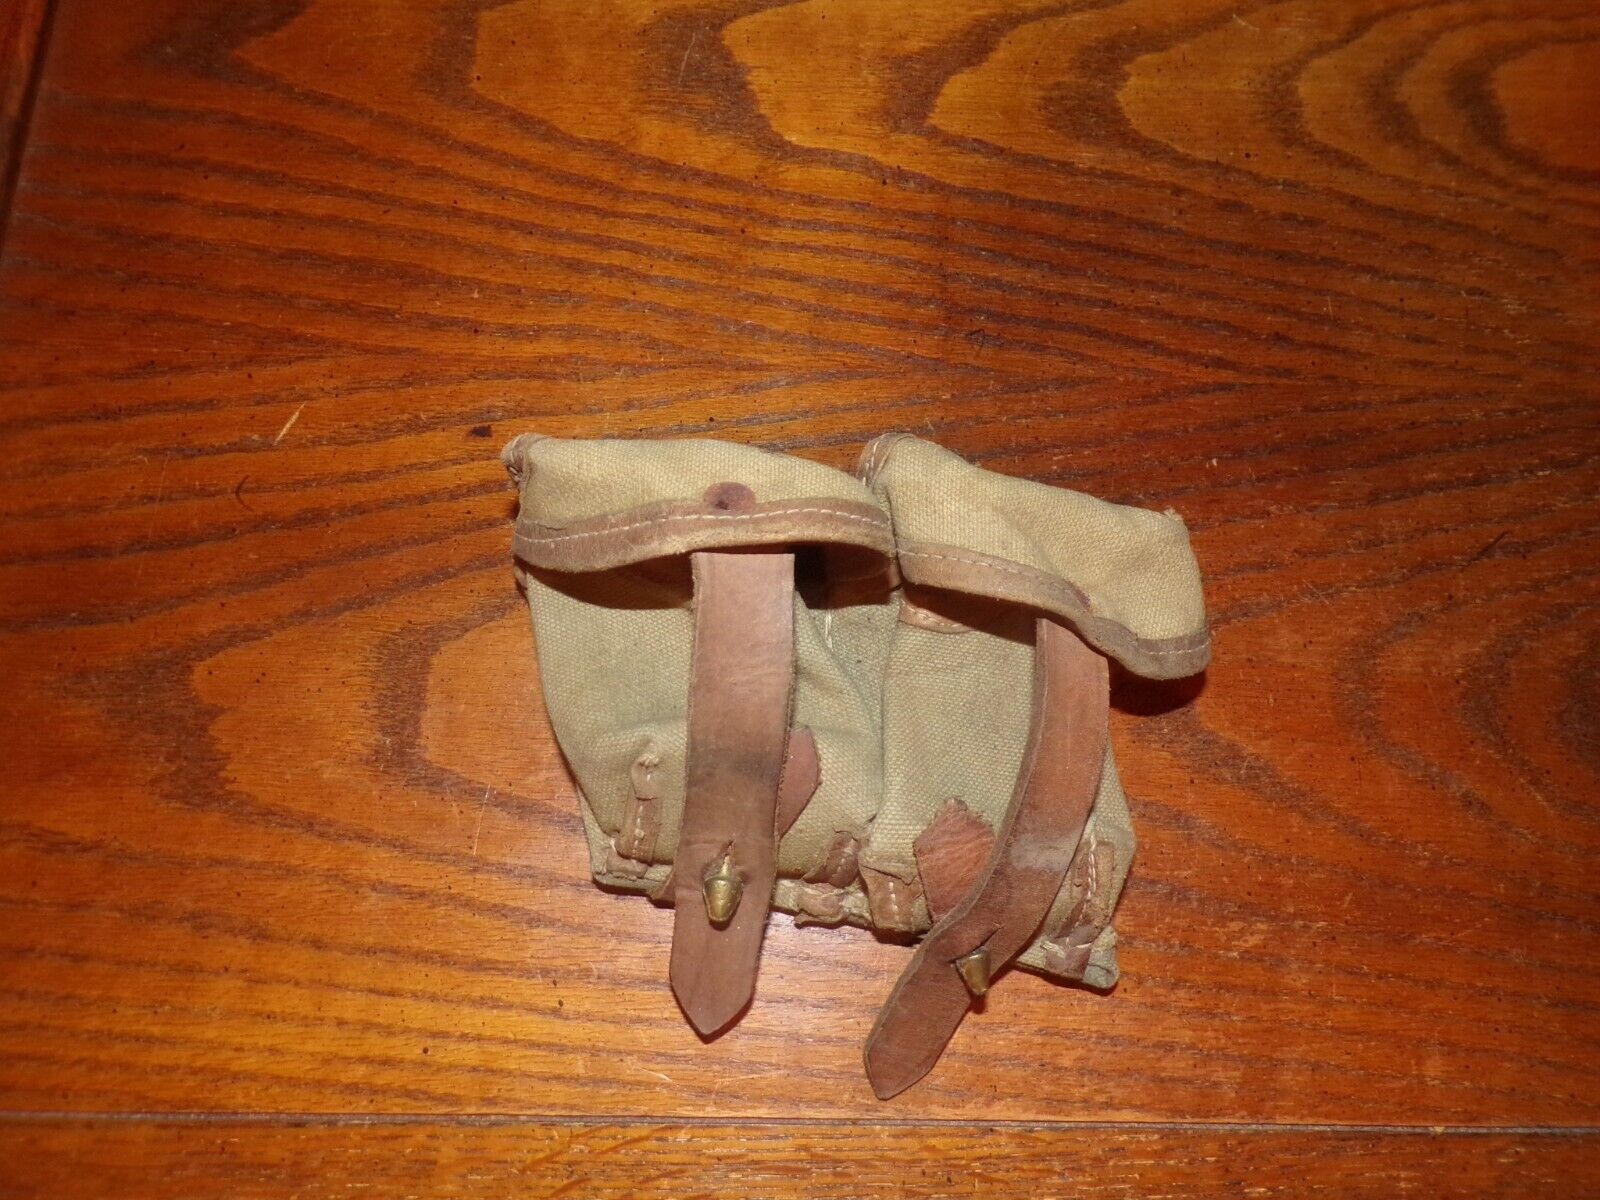 bulgarian military surplus 2 cell ammo pouch 8mm steyr canvas with leather trim